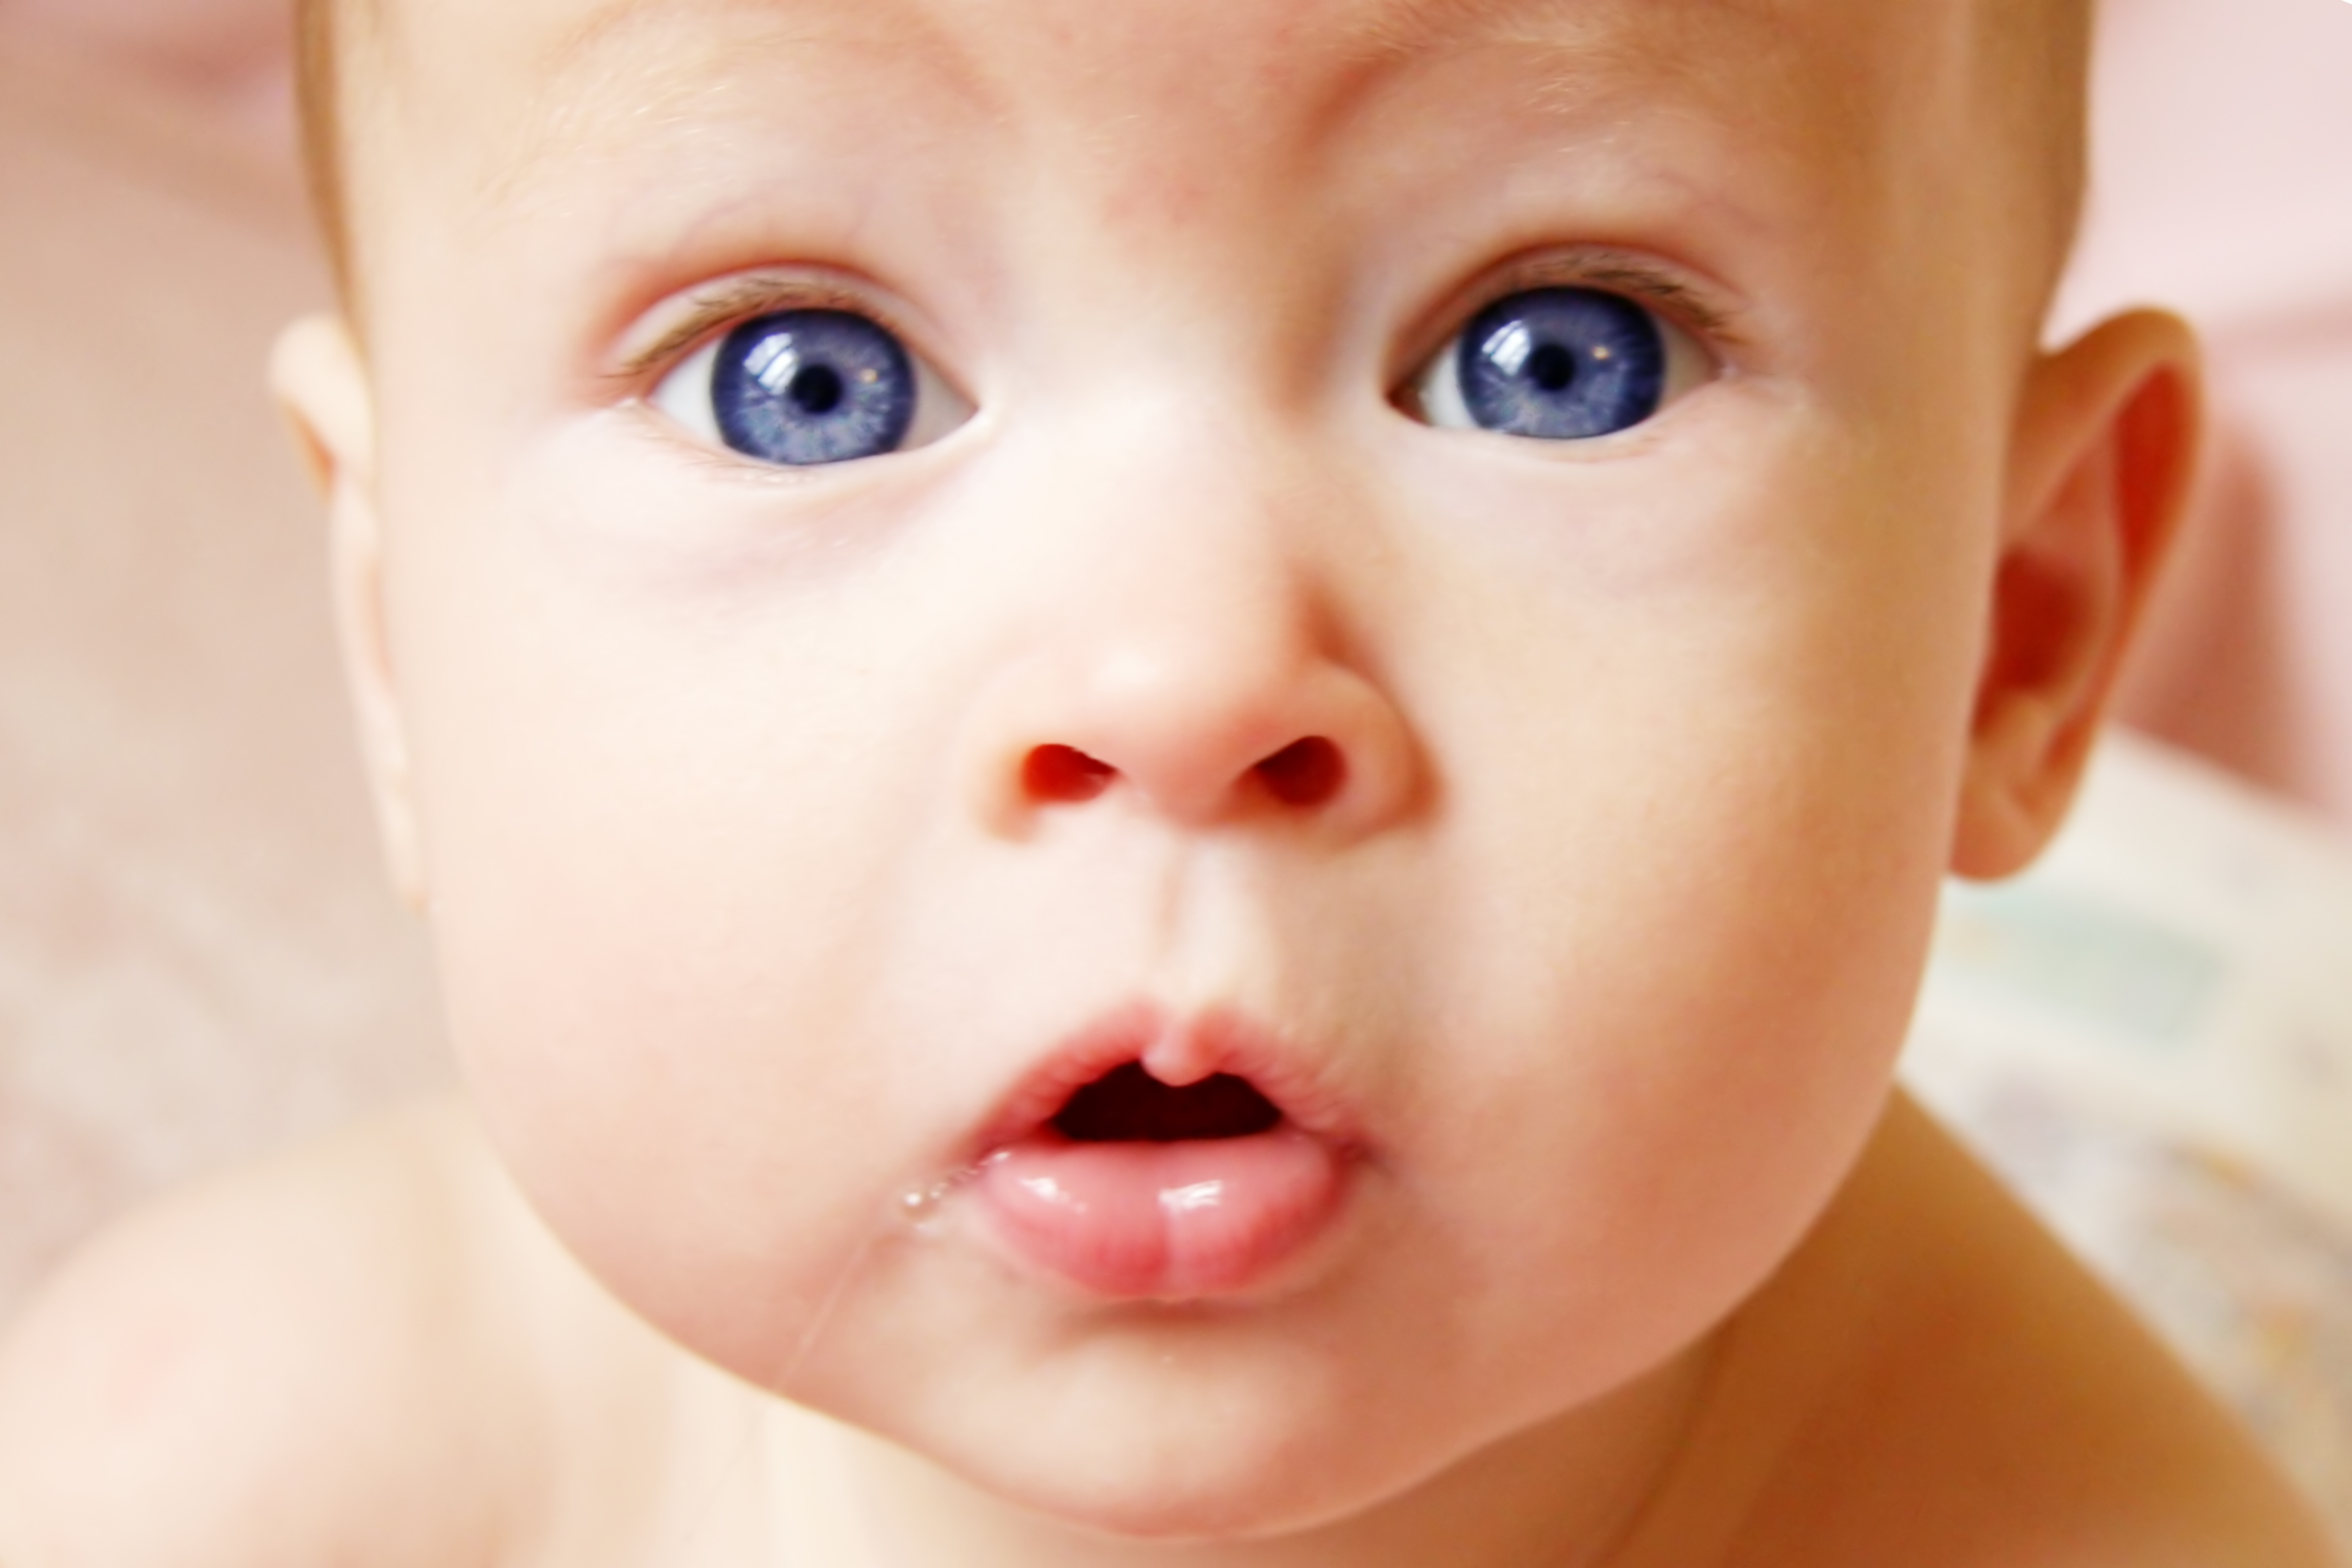 When Are A Baby’s Eyes Fully Developed?